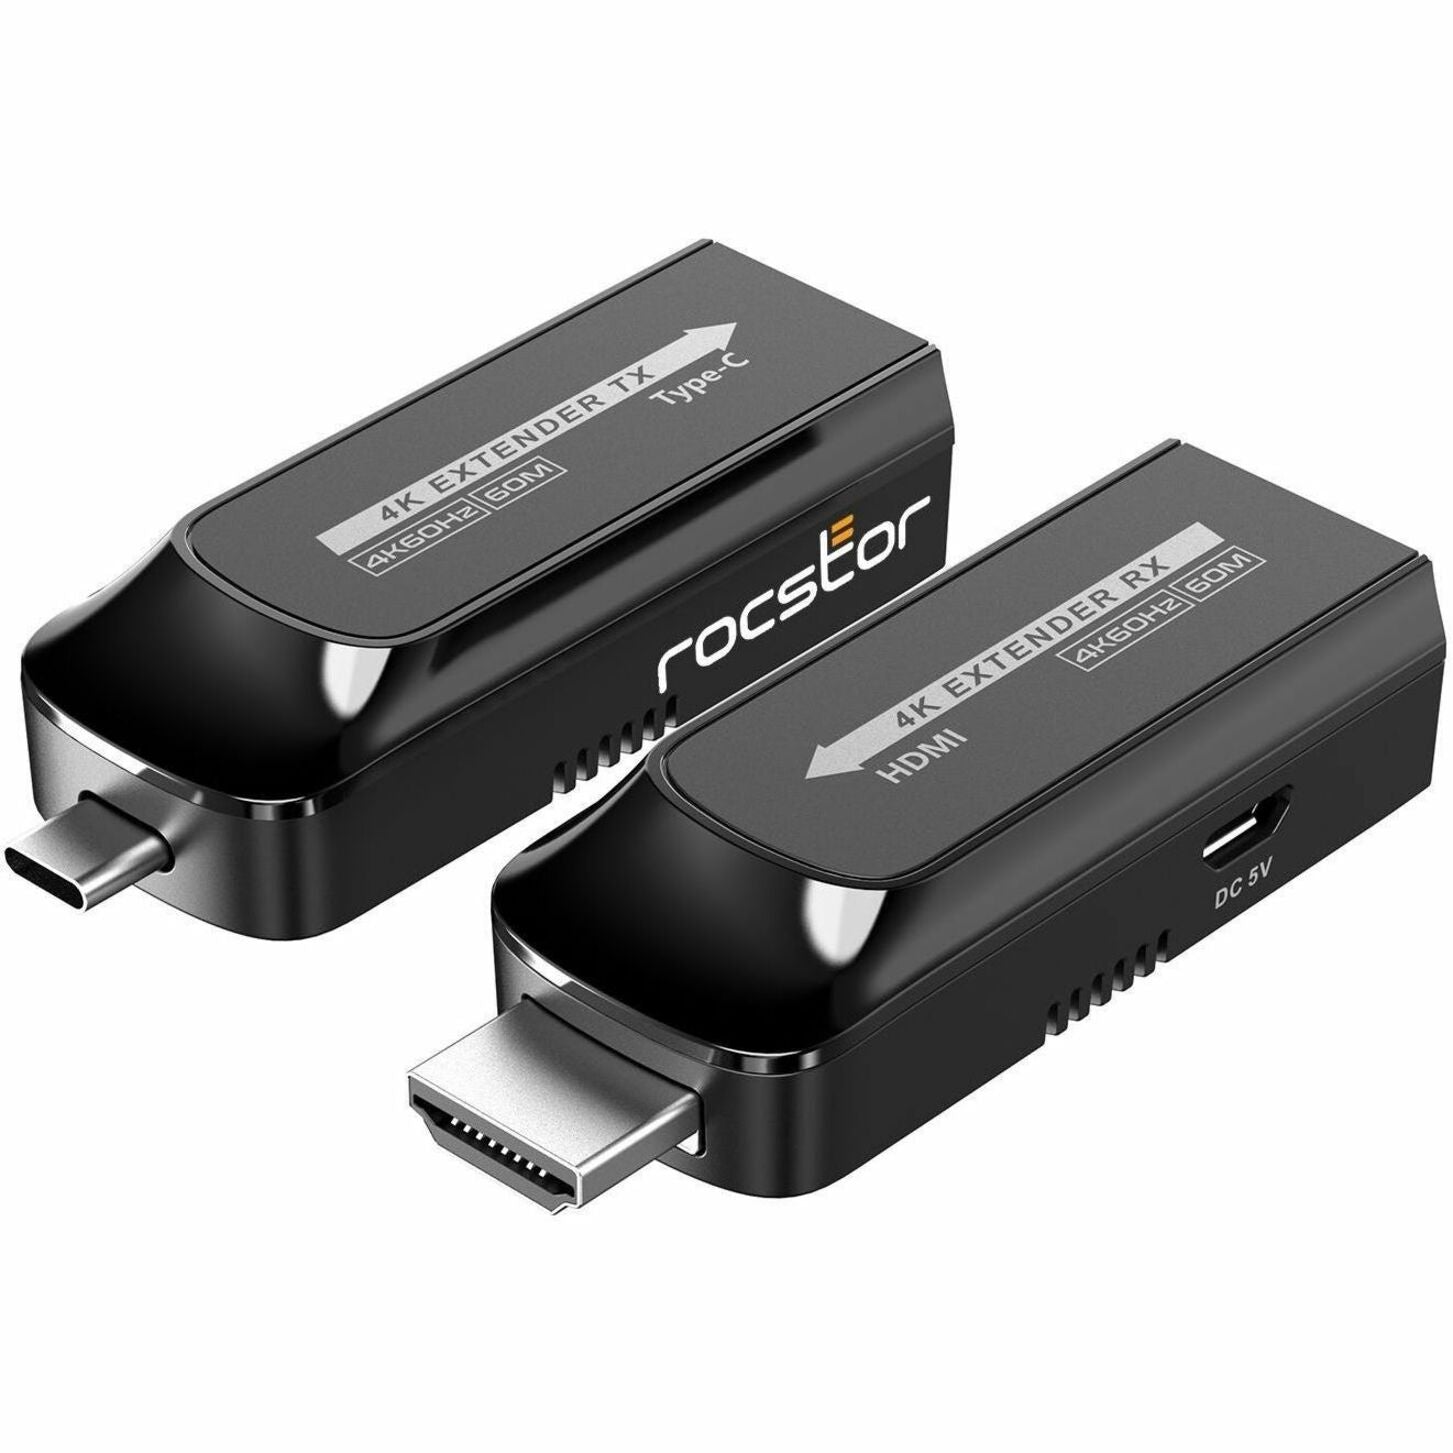 Rocstor Y10G007-B1 USB 3.1 Type-C to HDMI 2.0 Adapter 4K Video Support 2-Year Warranty